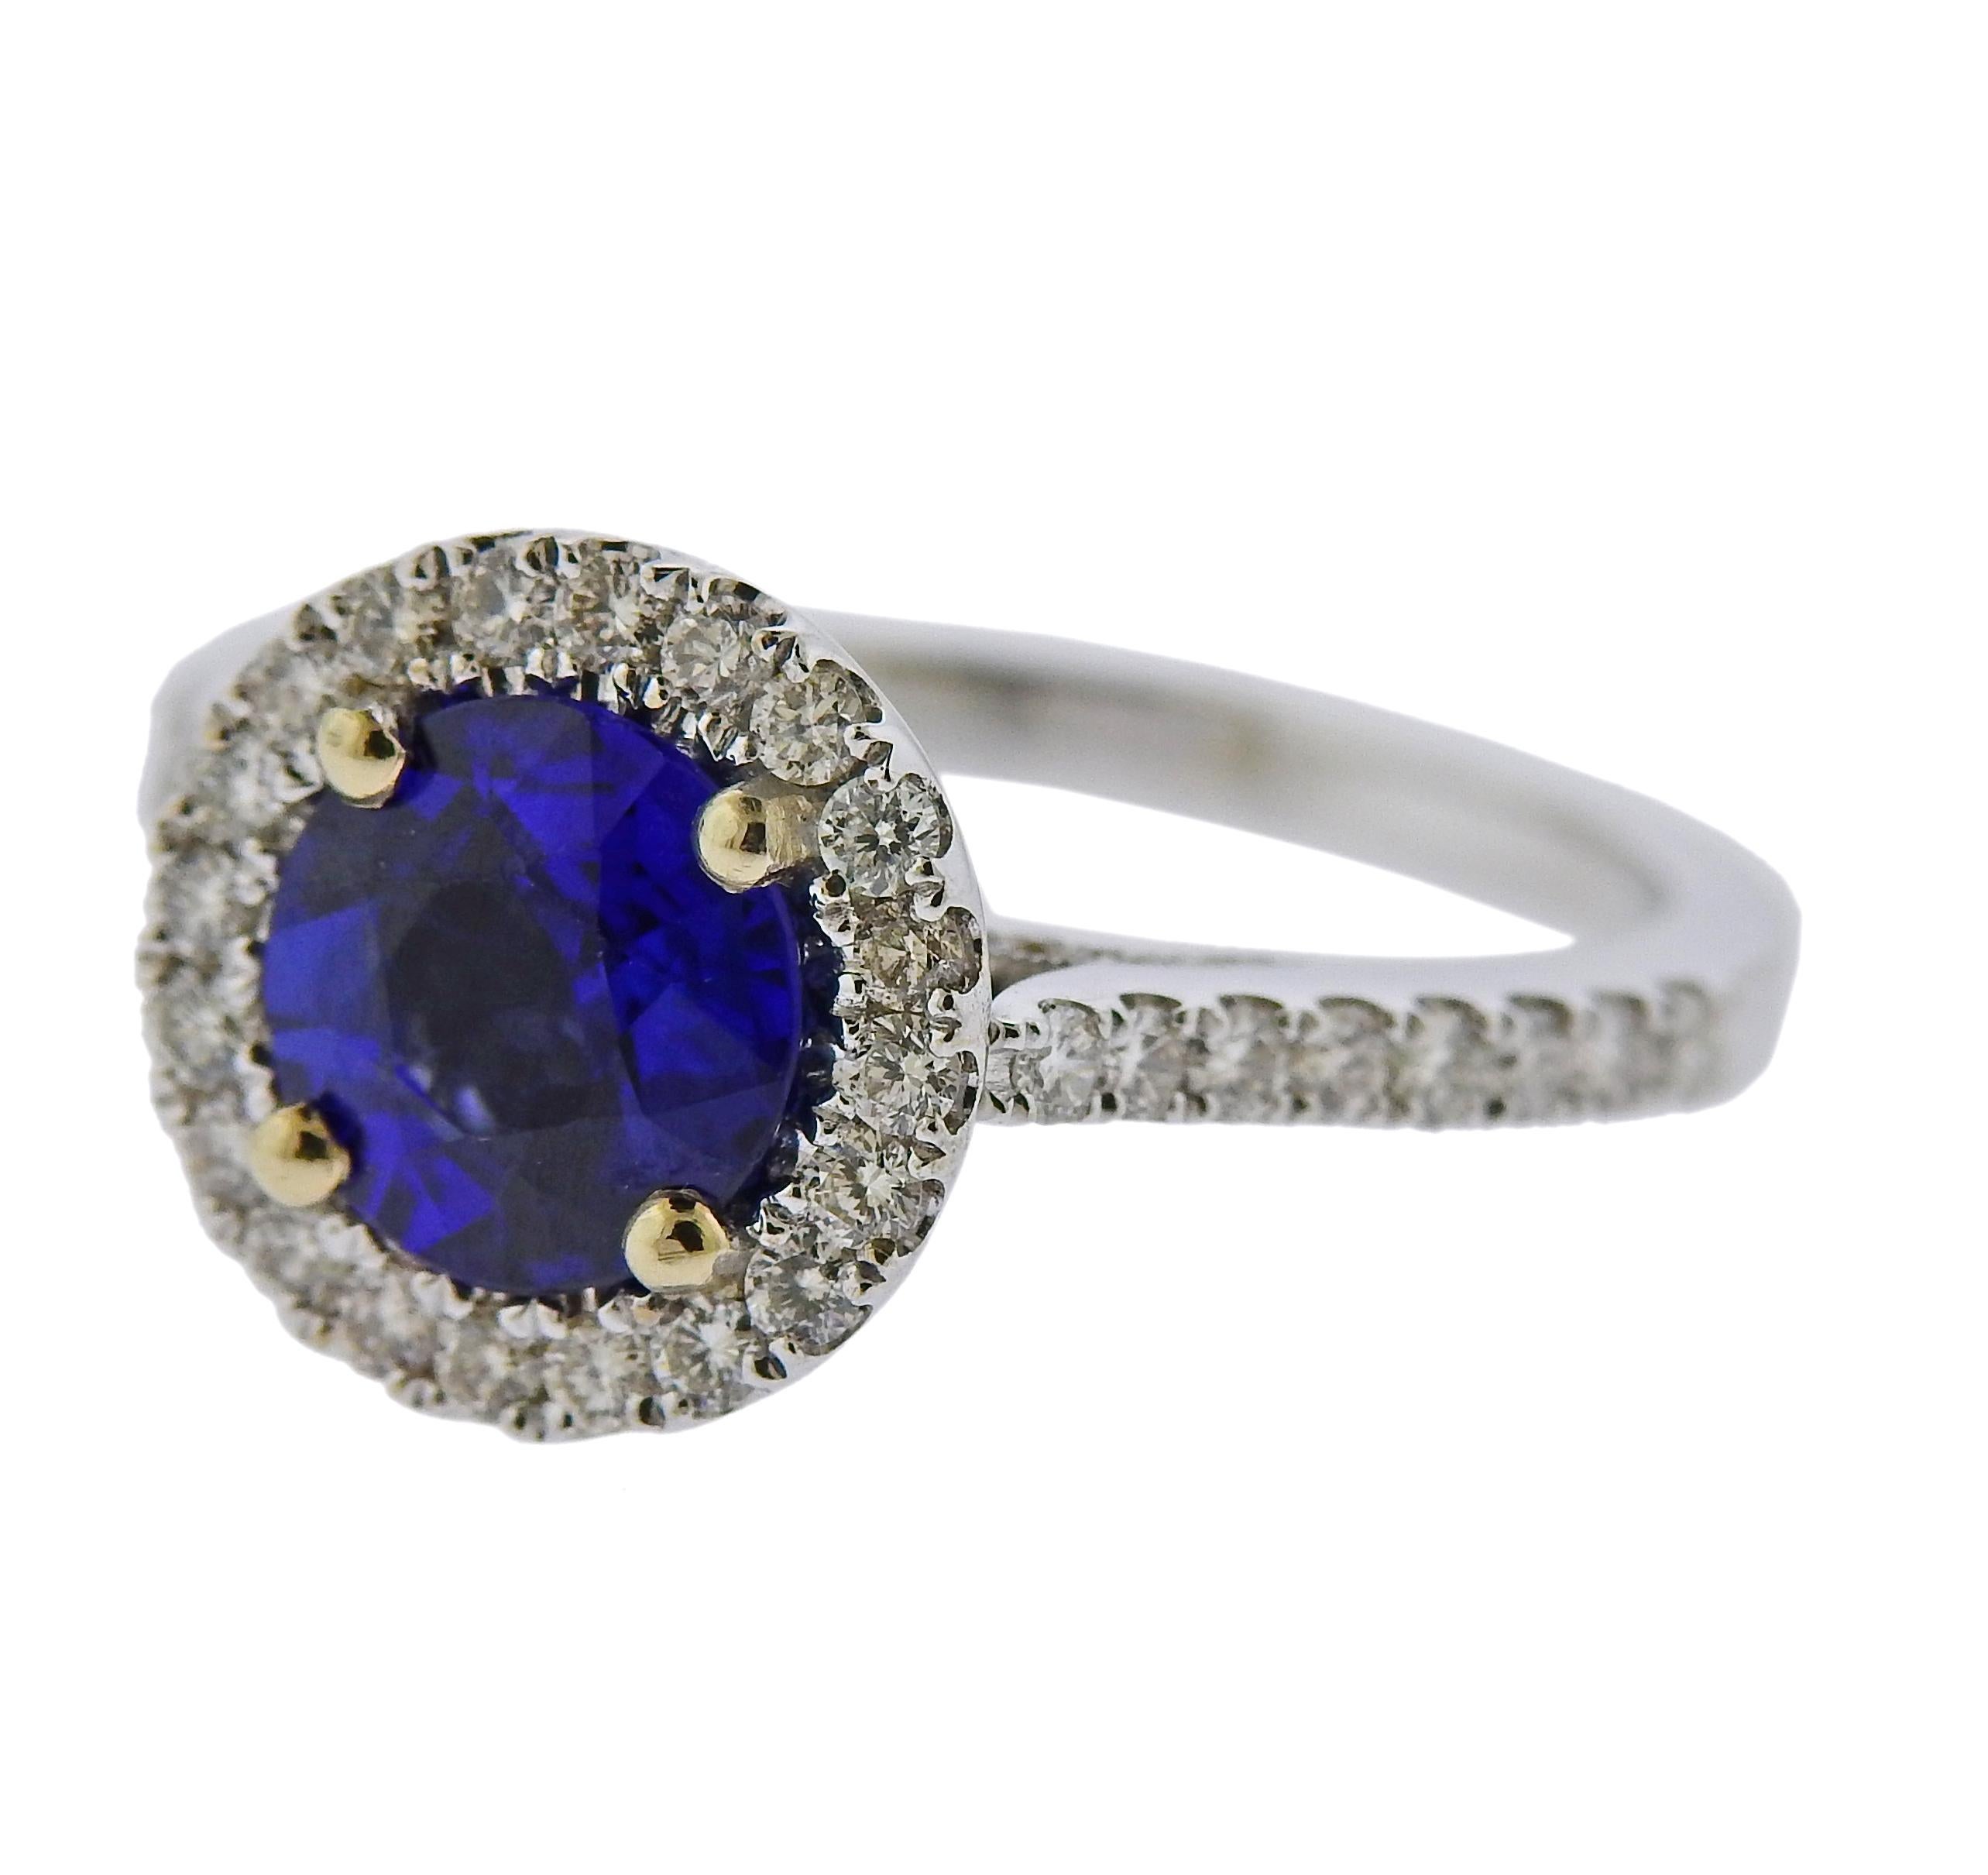 Modern 18k gold engagement ring, featuring round blue sapphire in the center ( 7.7mm in diameter), surrounded with 0.83ctw in diamonds. Ring size 6.75, top is 12mm in diameter. Marked D0.83, k18.  Weighs 4.5 grams.